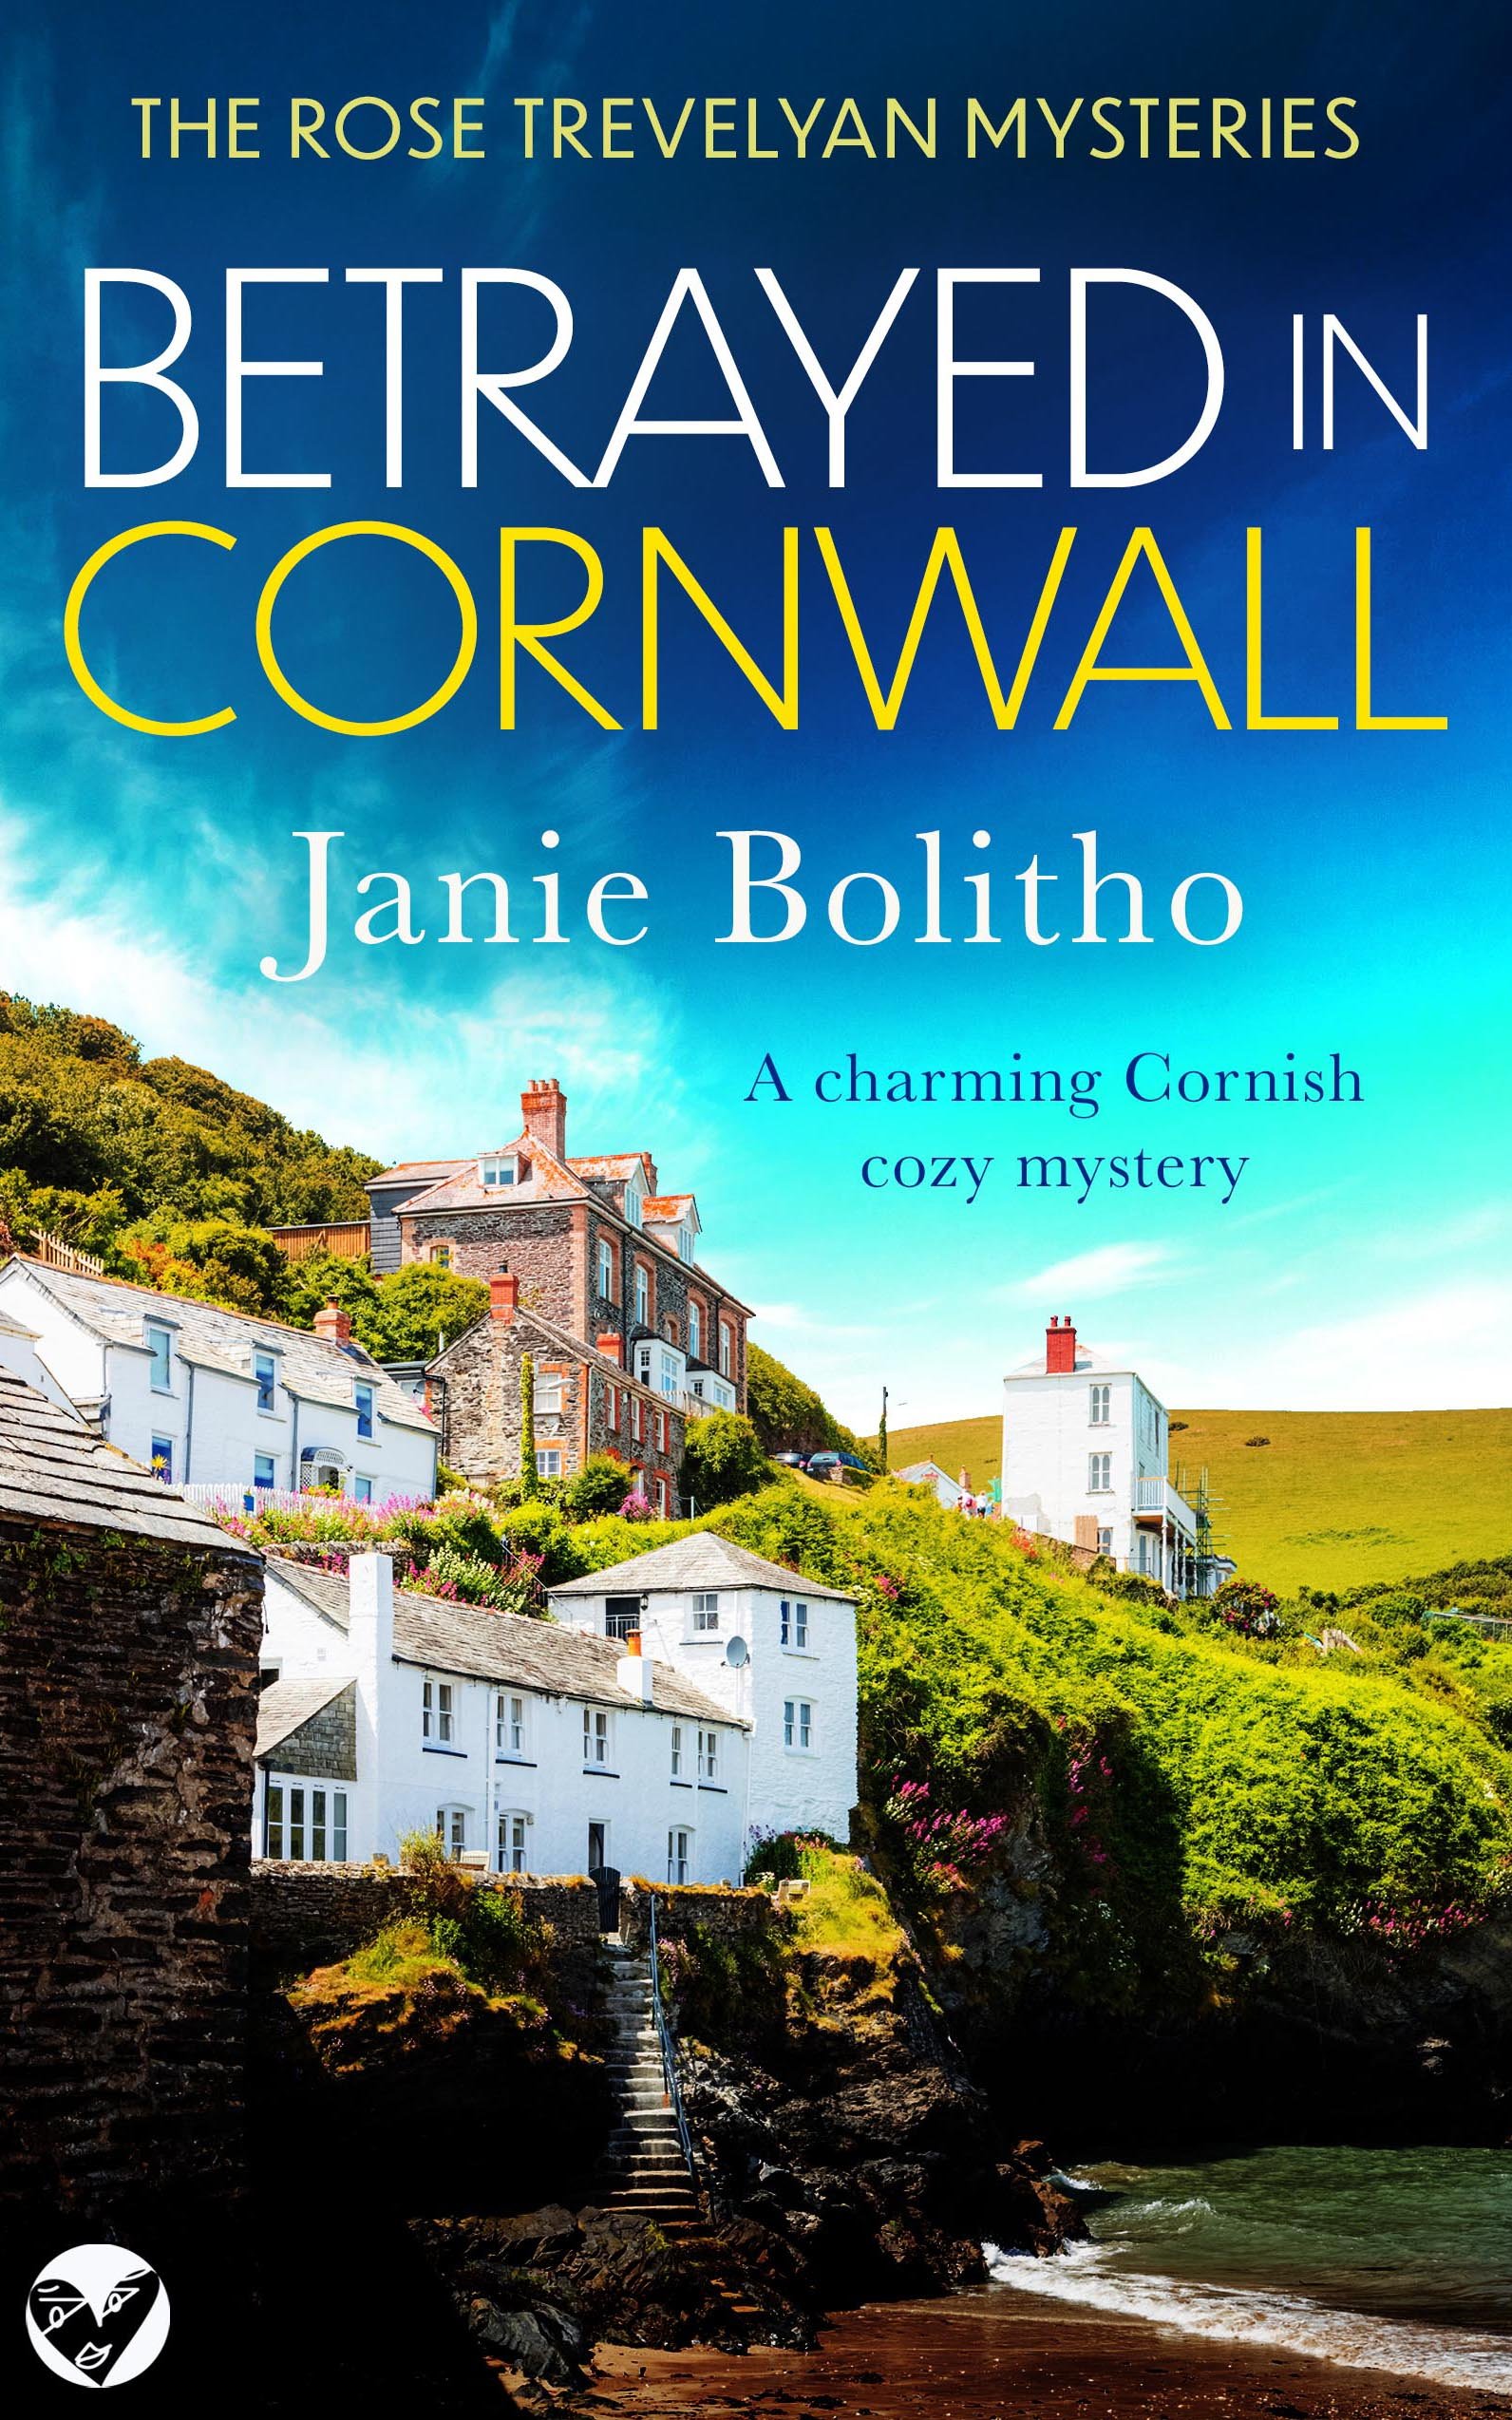 BETRAYED IN CORNWALL Cover publish.jpg